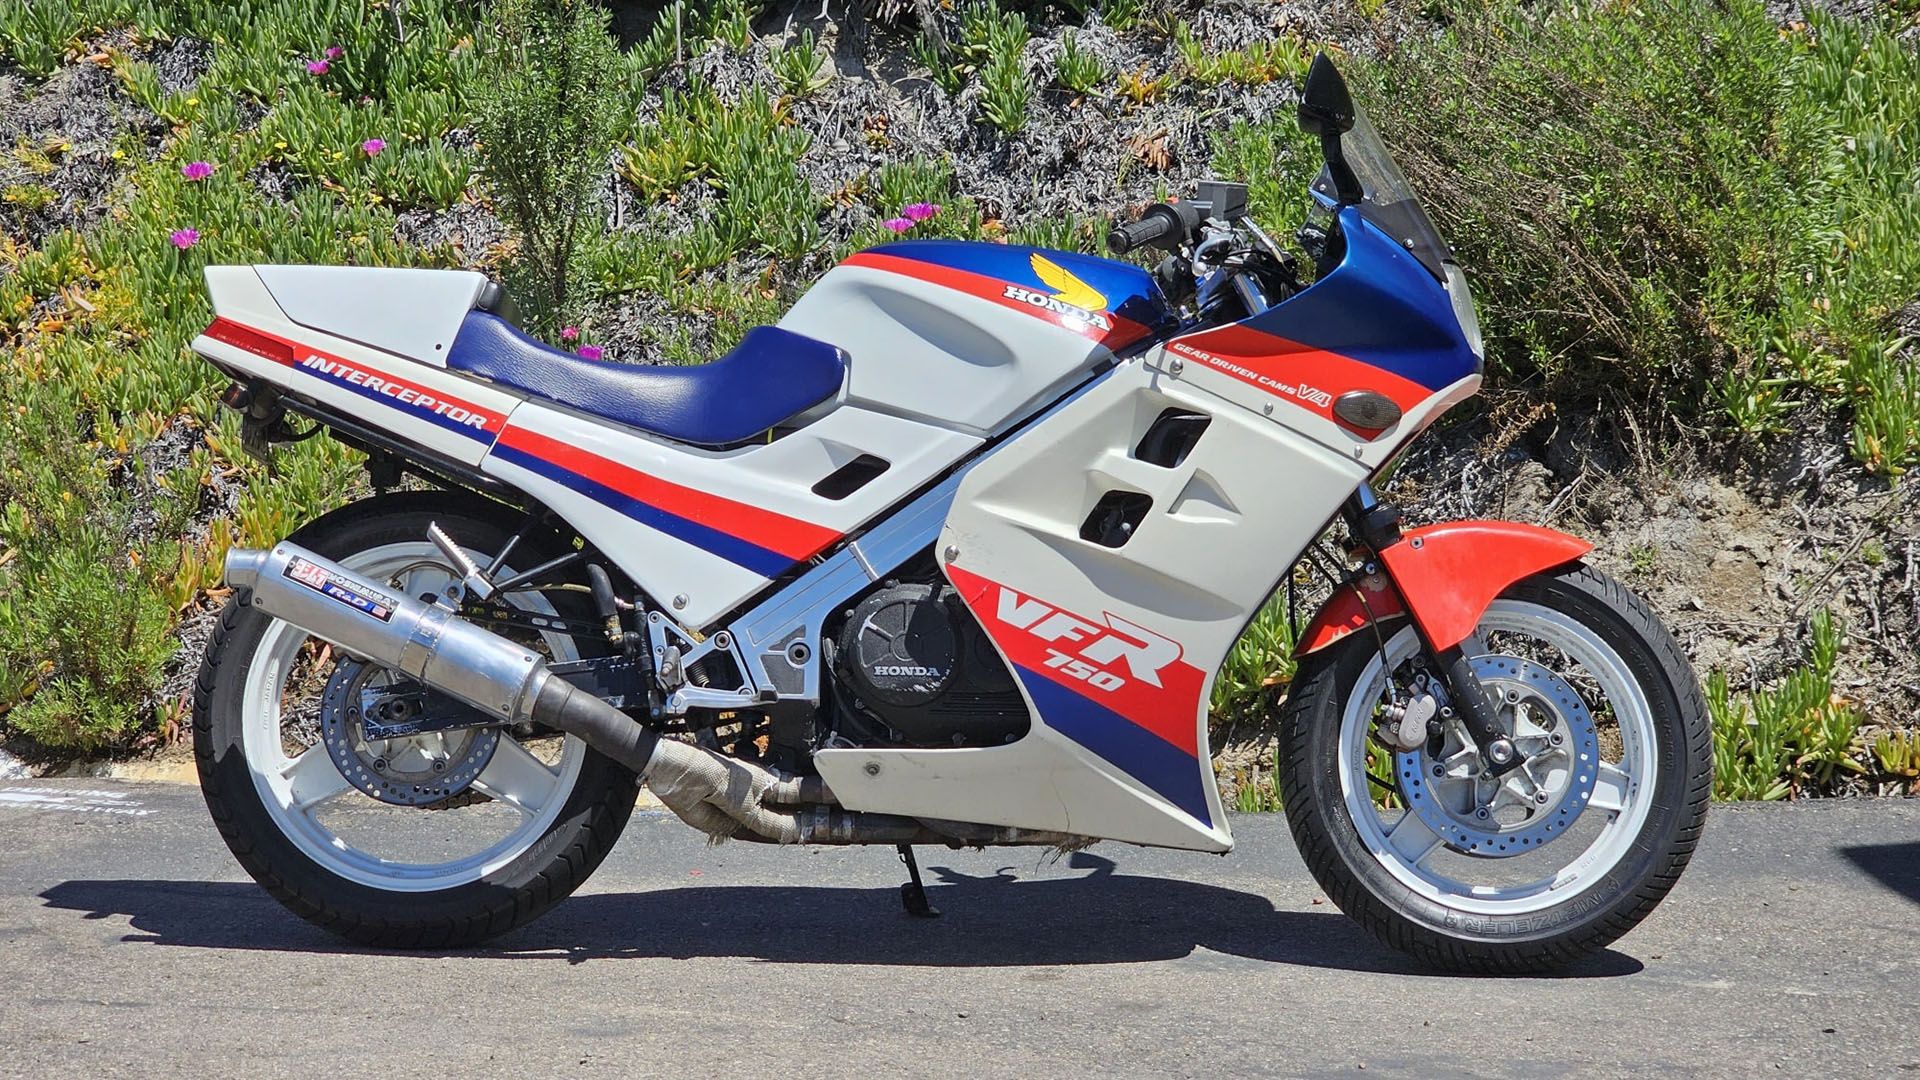 Why Honda Made The Limited-Run VFR750F Superbike